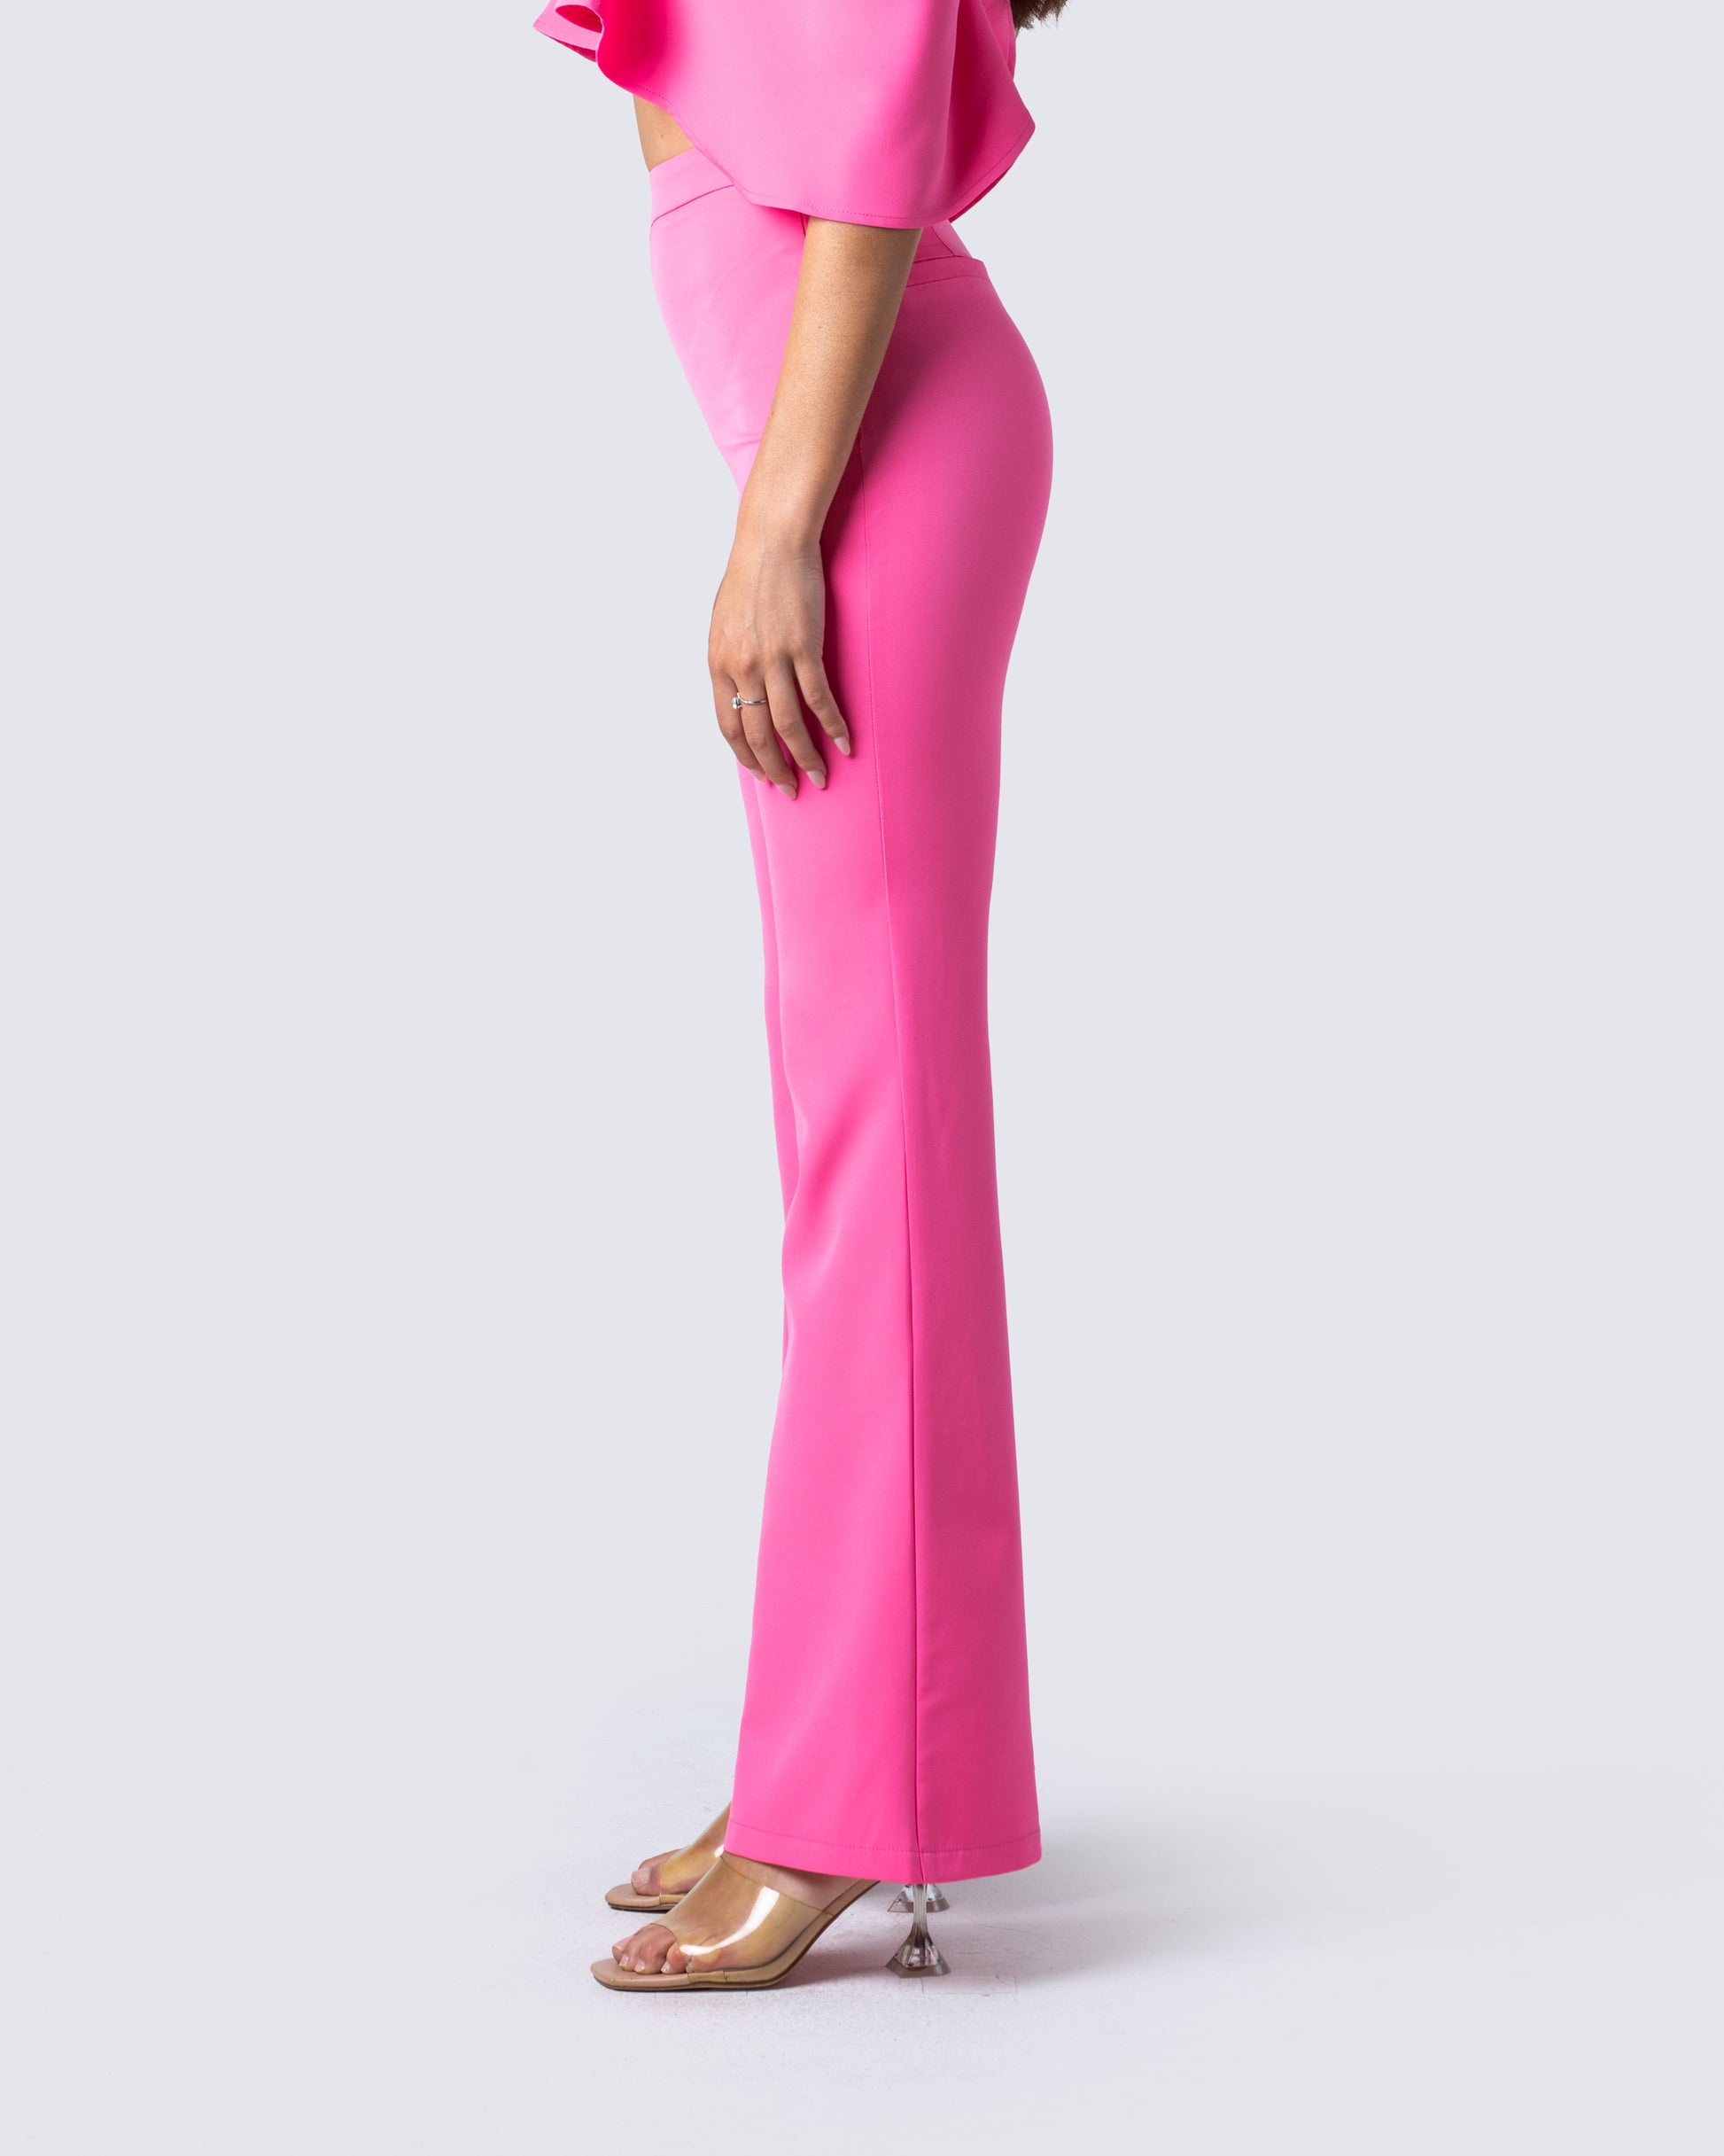 HANSEL HIGH RISE PANTS WITH SLITS in PINK